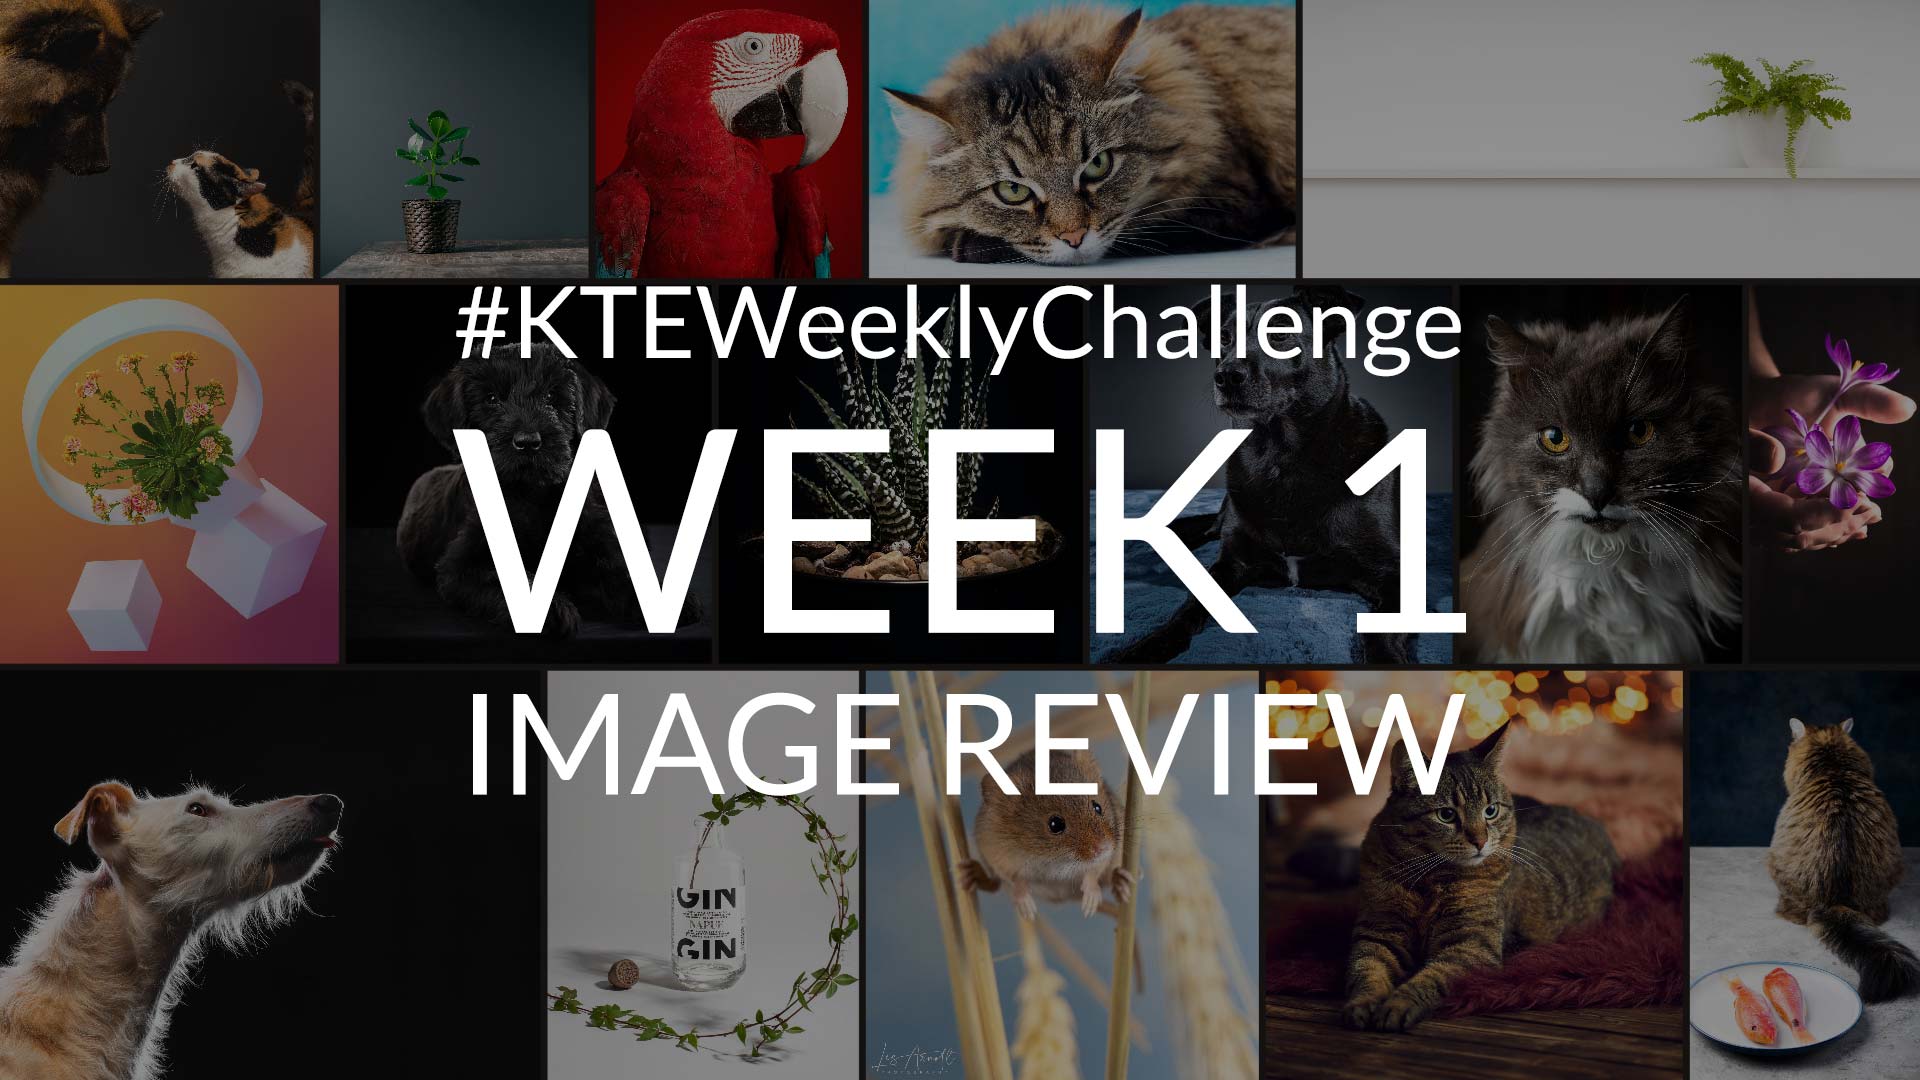 Photography Challenge Image Review: Week 1